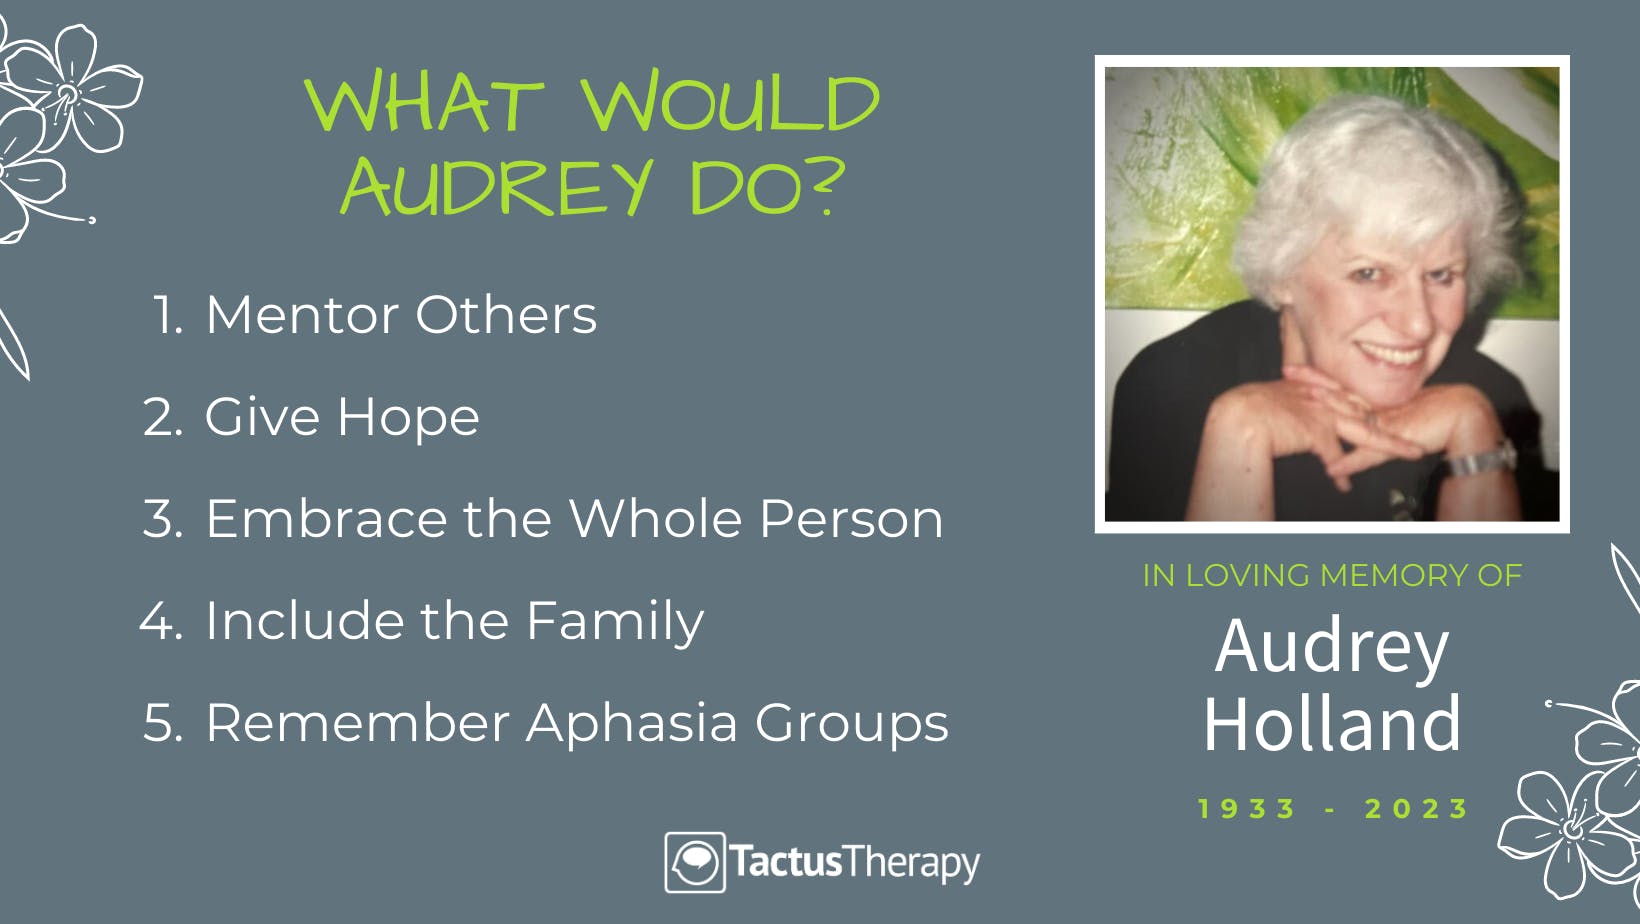 Picture of Audrey Holland with 5 things she would want you to do listed